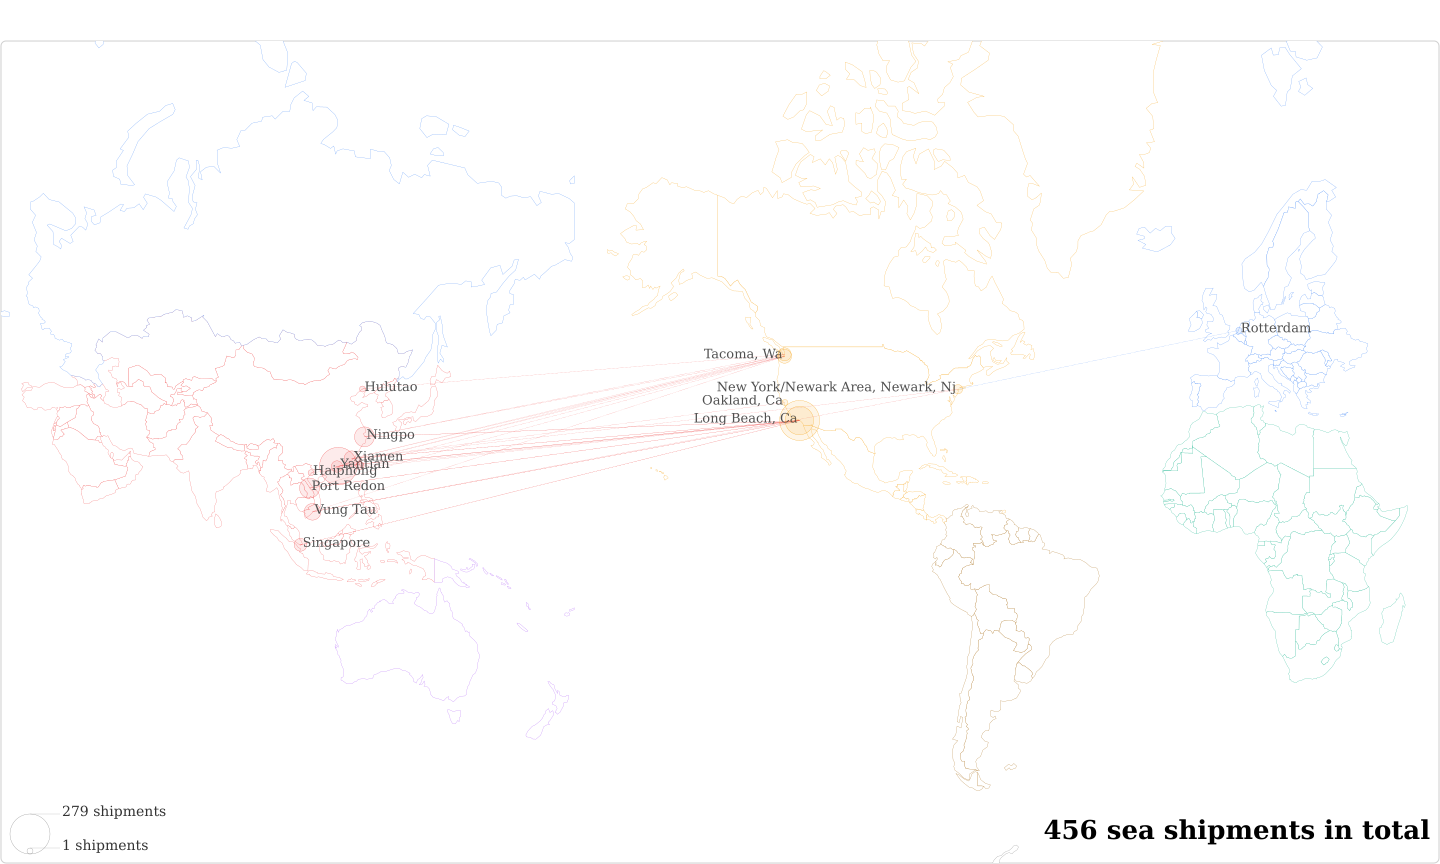 Golden Wolfe Footwear Hk's Imports Per Country Map